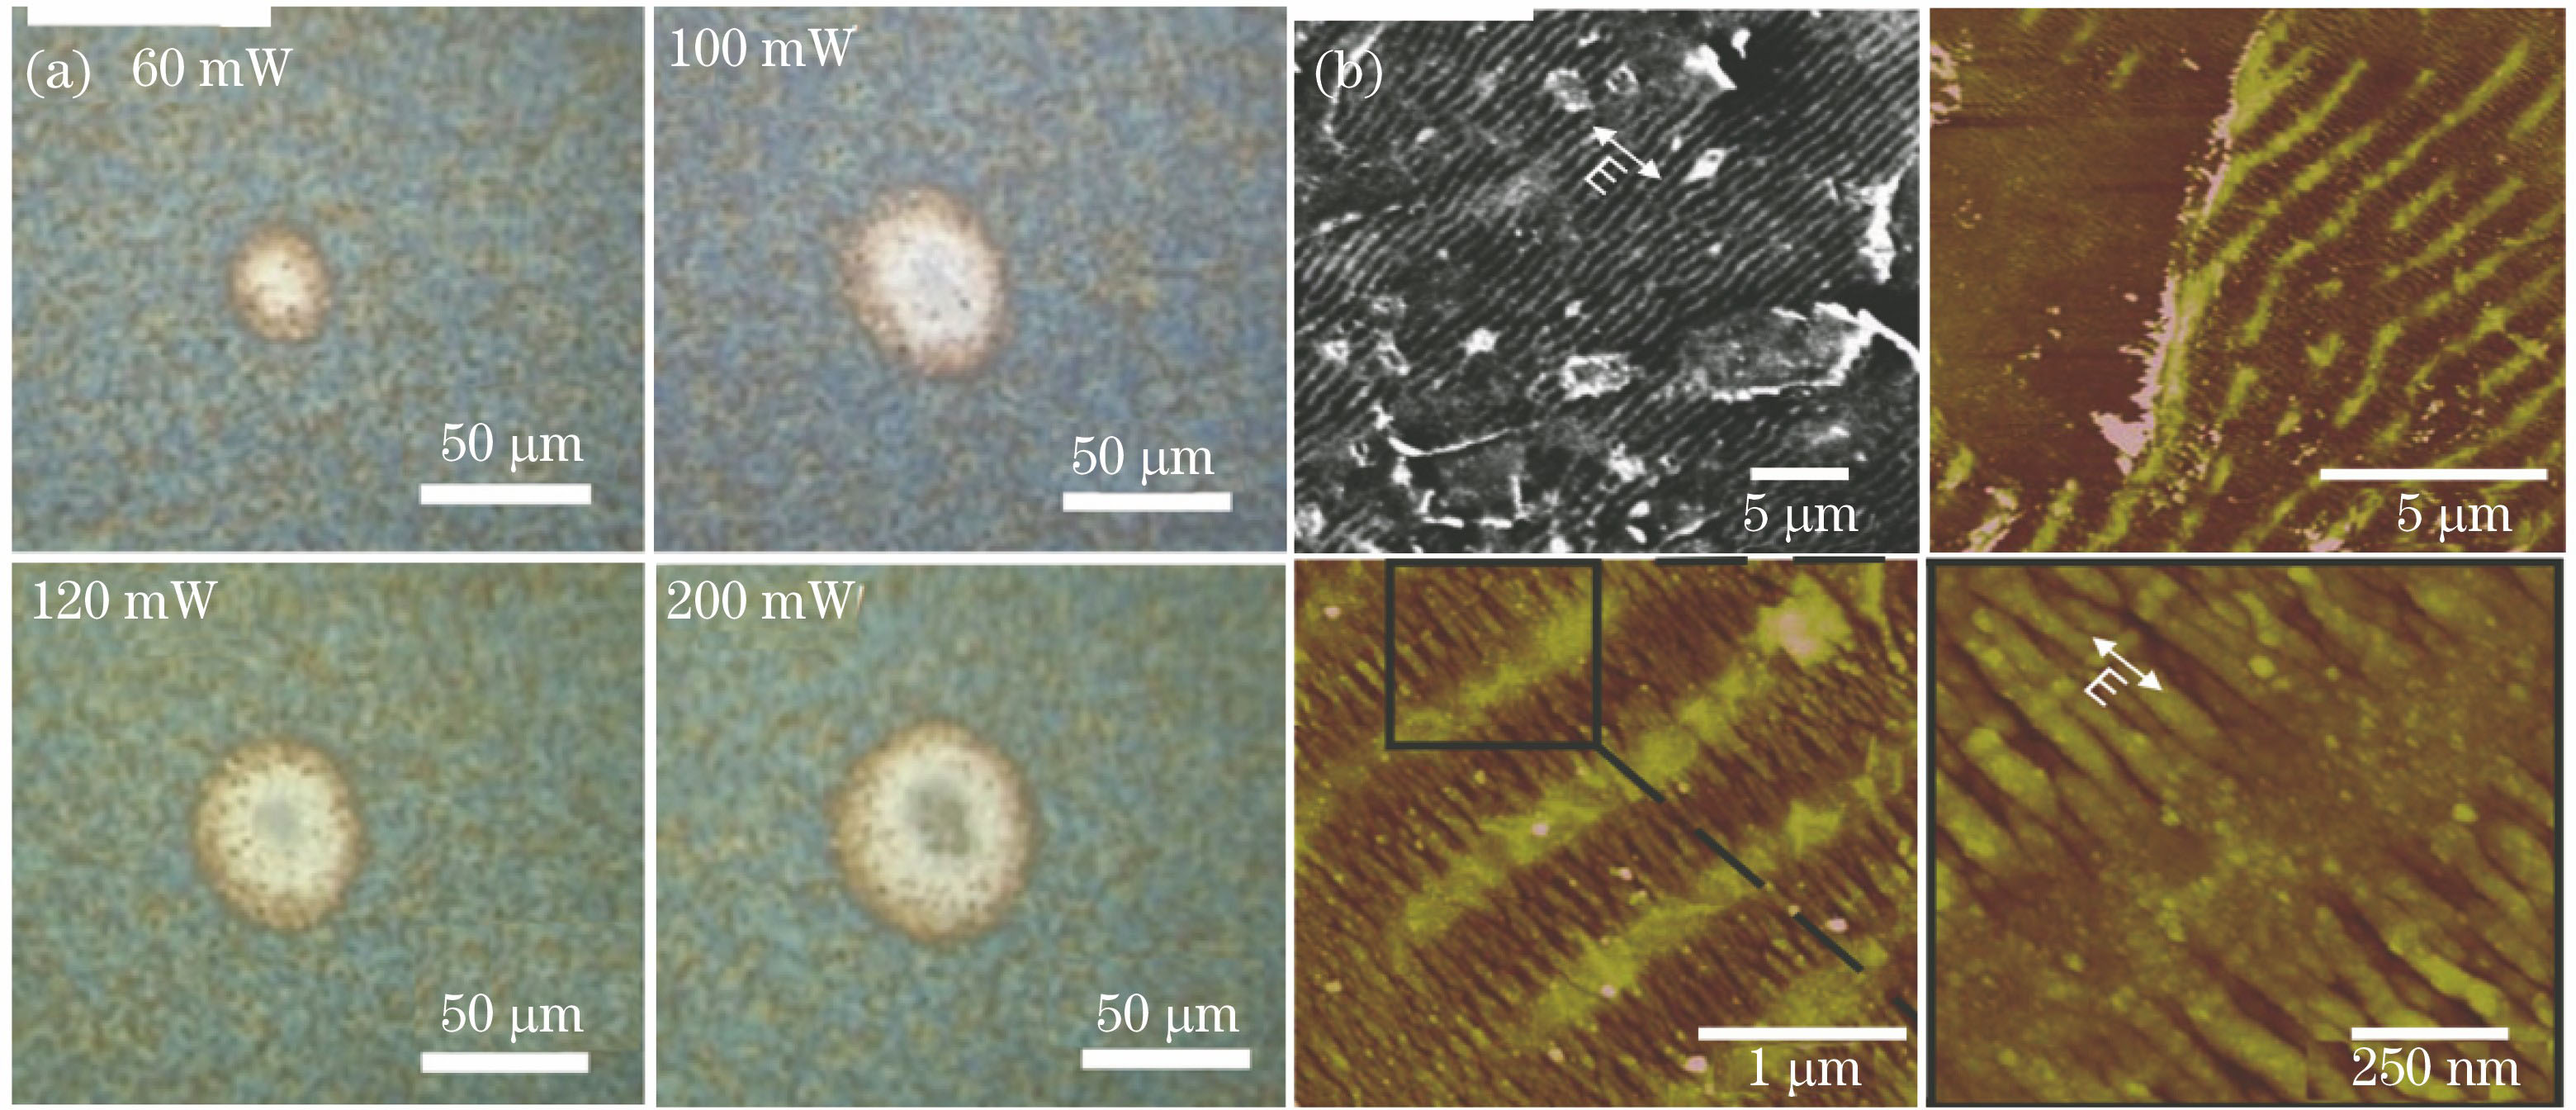 Experimental results. (a) Optical images of CW laser irradiated spots at various laser powers[31]; (b) SEM and AFM images of periodic surface structures[32]